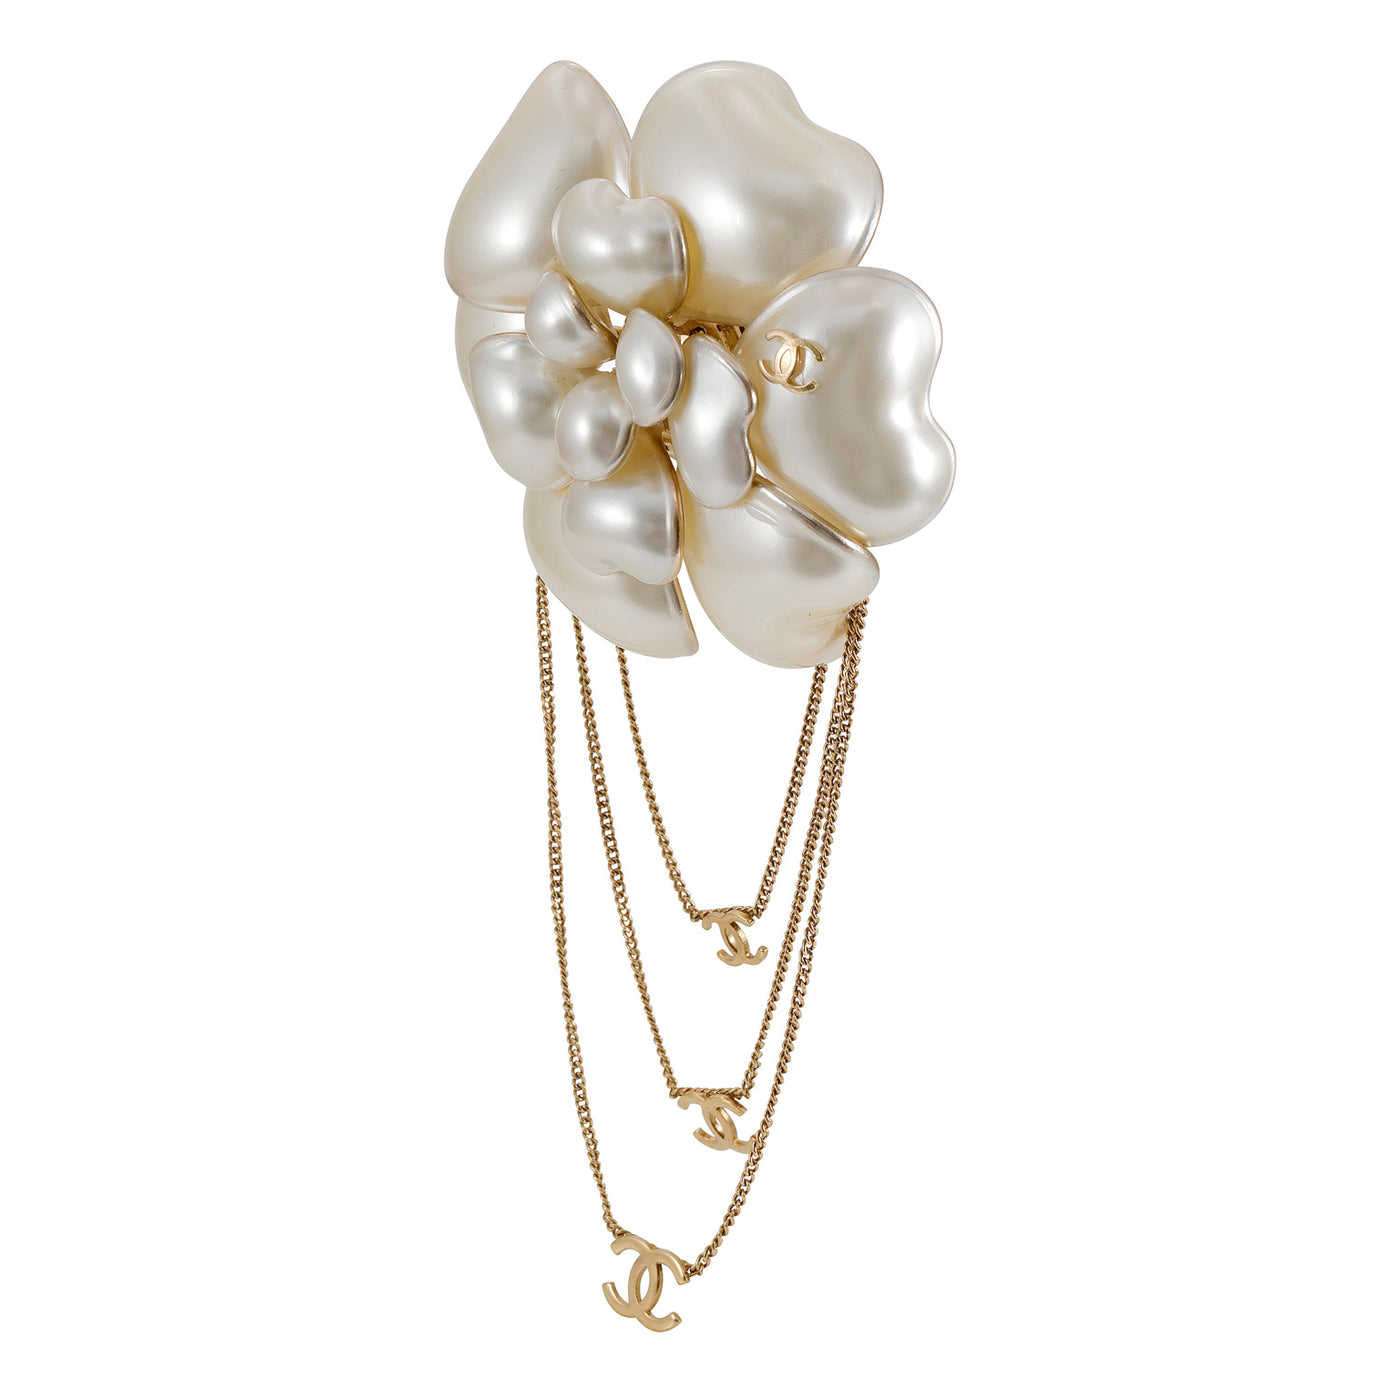 Chanel Pearlized Camellia Flower Brooch Pendant with CC Chains